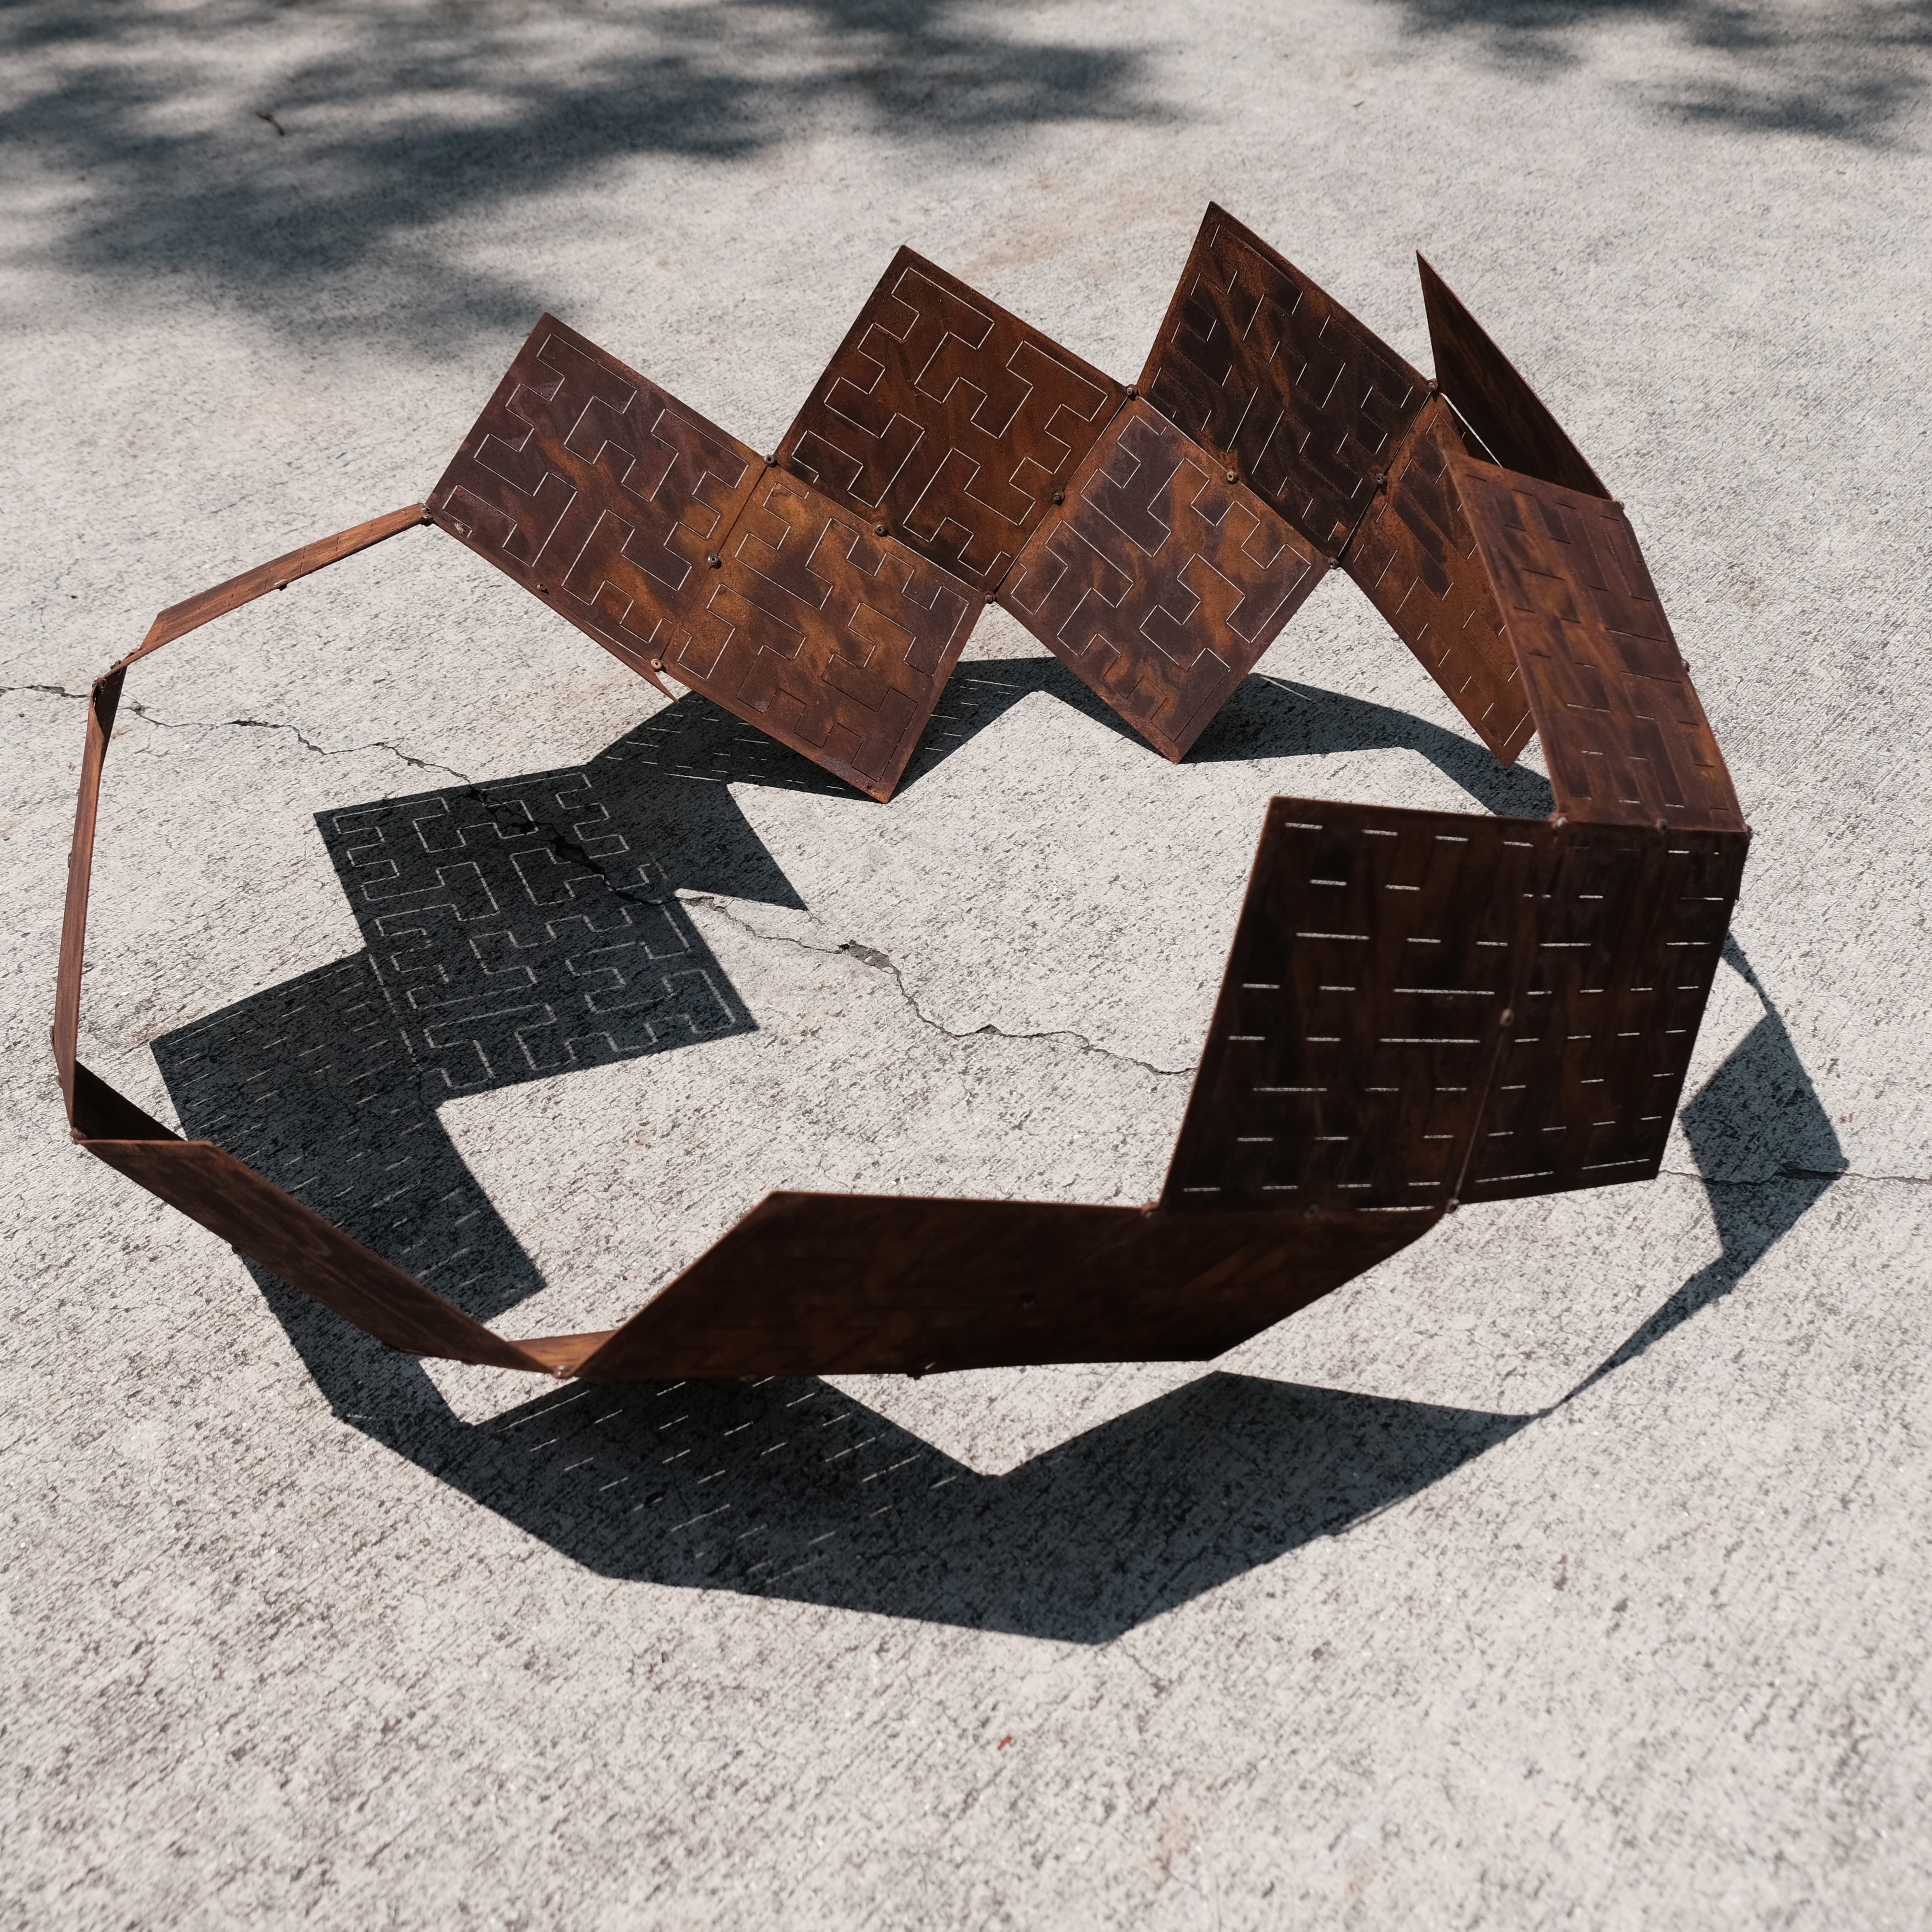 Adam Rowe, "square tile-based surface-tiling curve listing band (И 3)", steel, dye oxide, 36” ø (approx.)